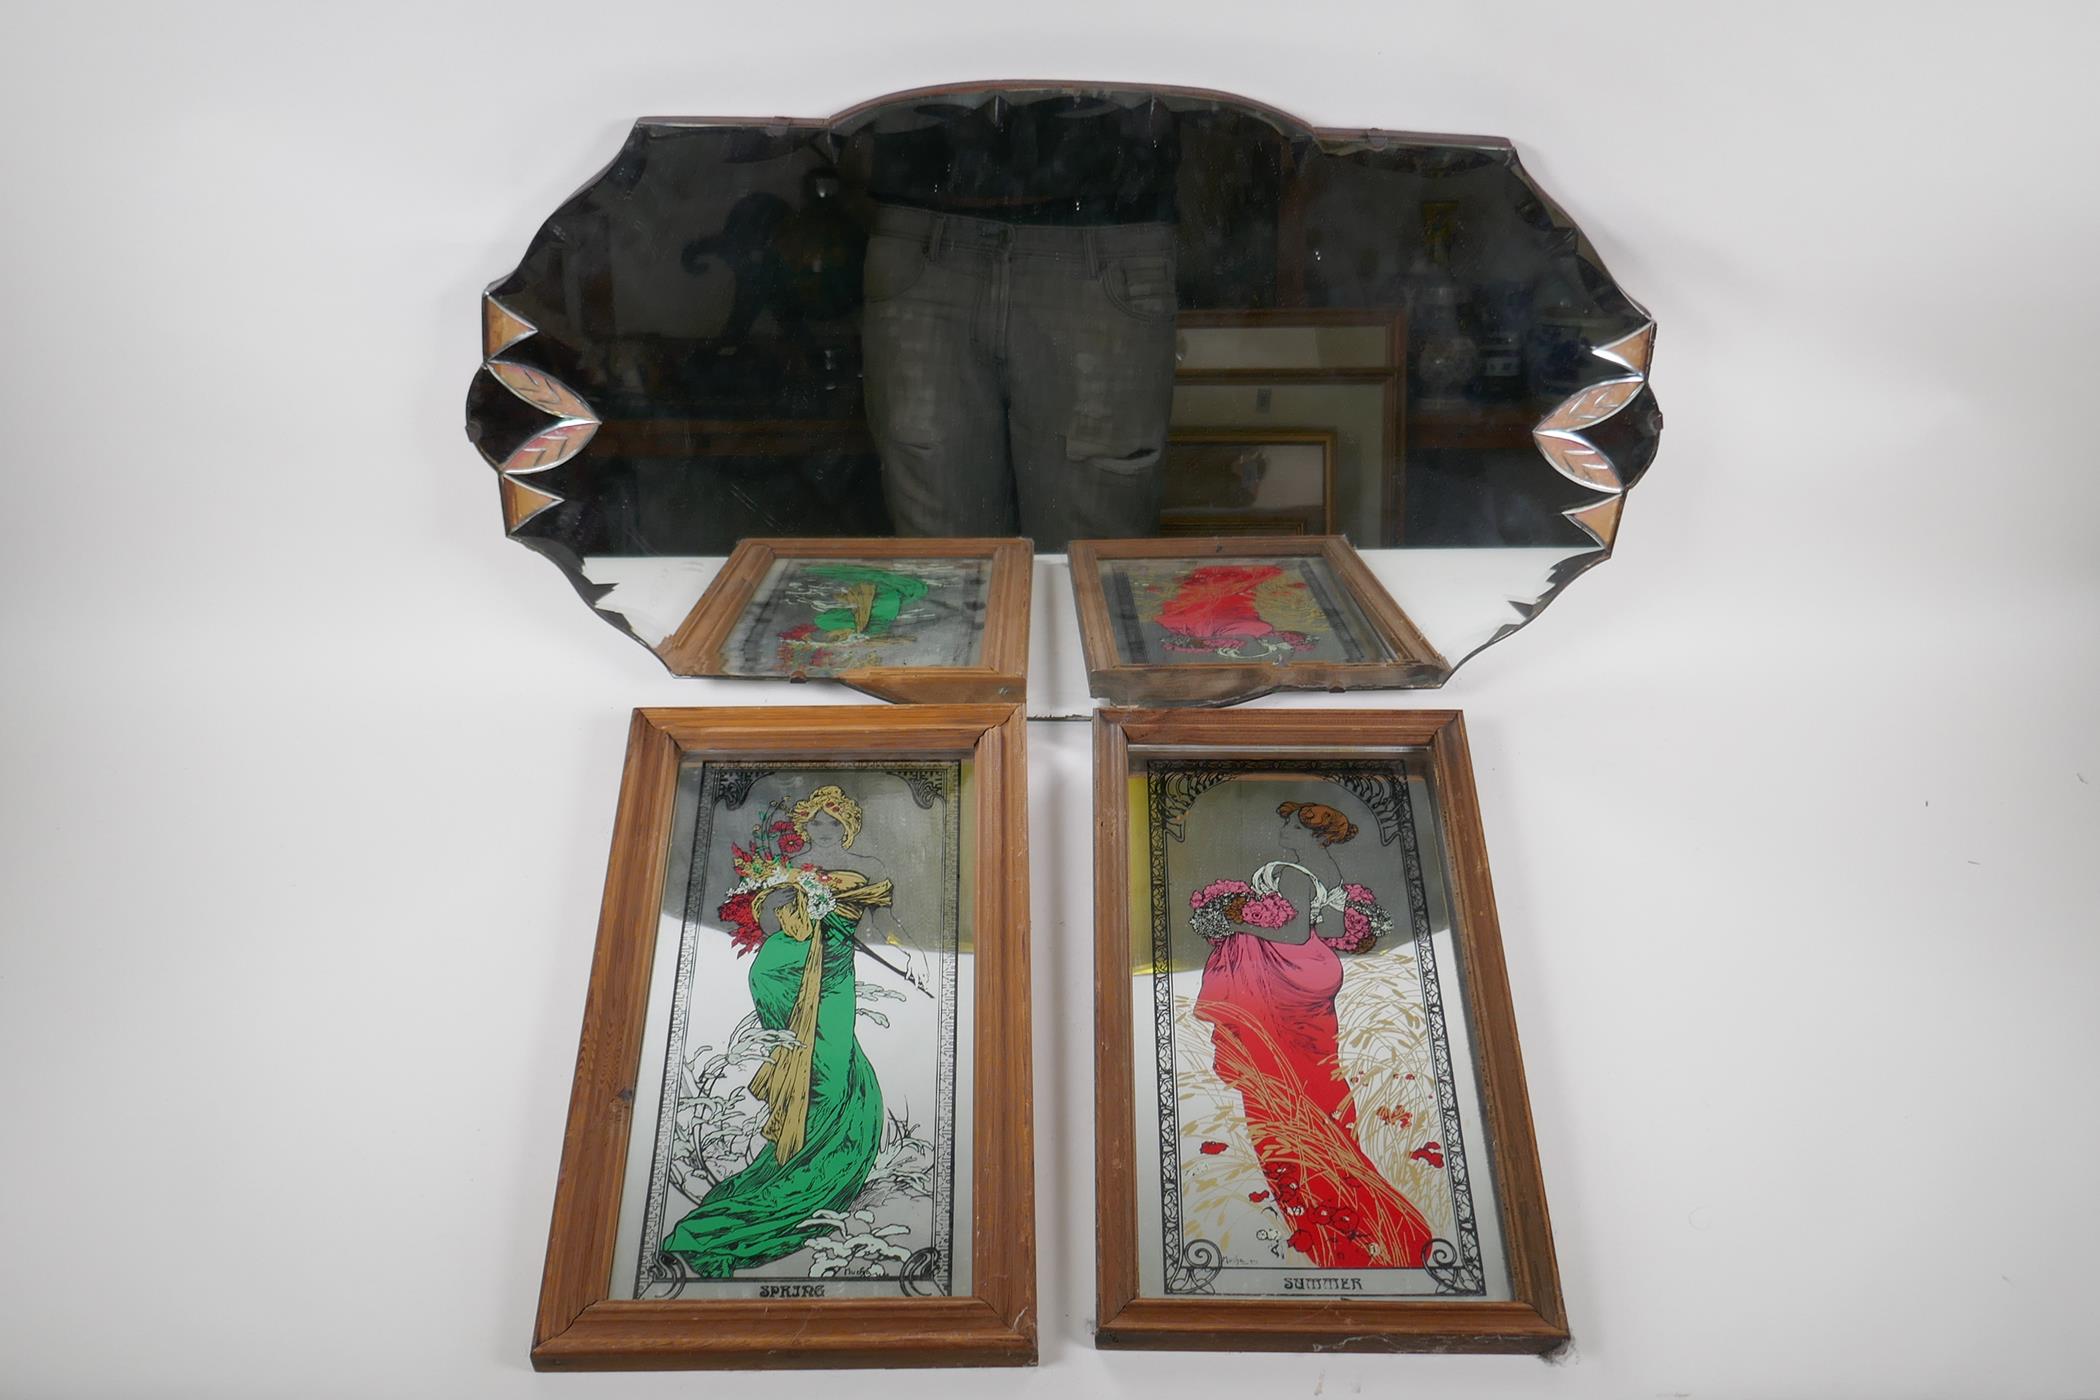 A pair of vintage reverse decorated mirrors depicting two of the seasons, and an Art Nouveau style